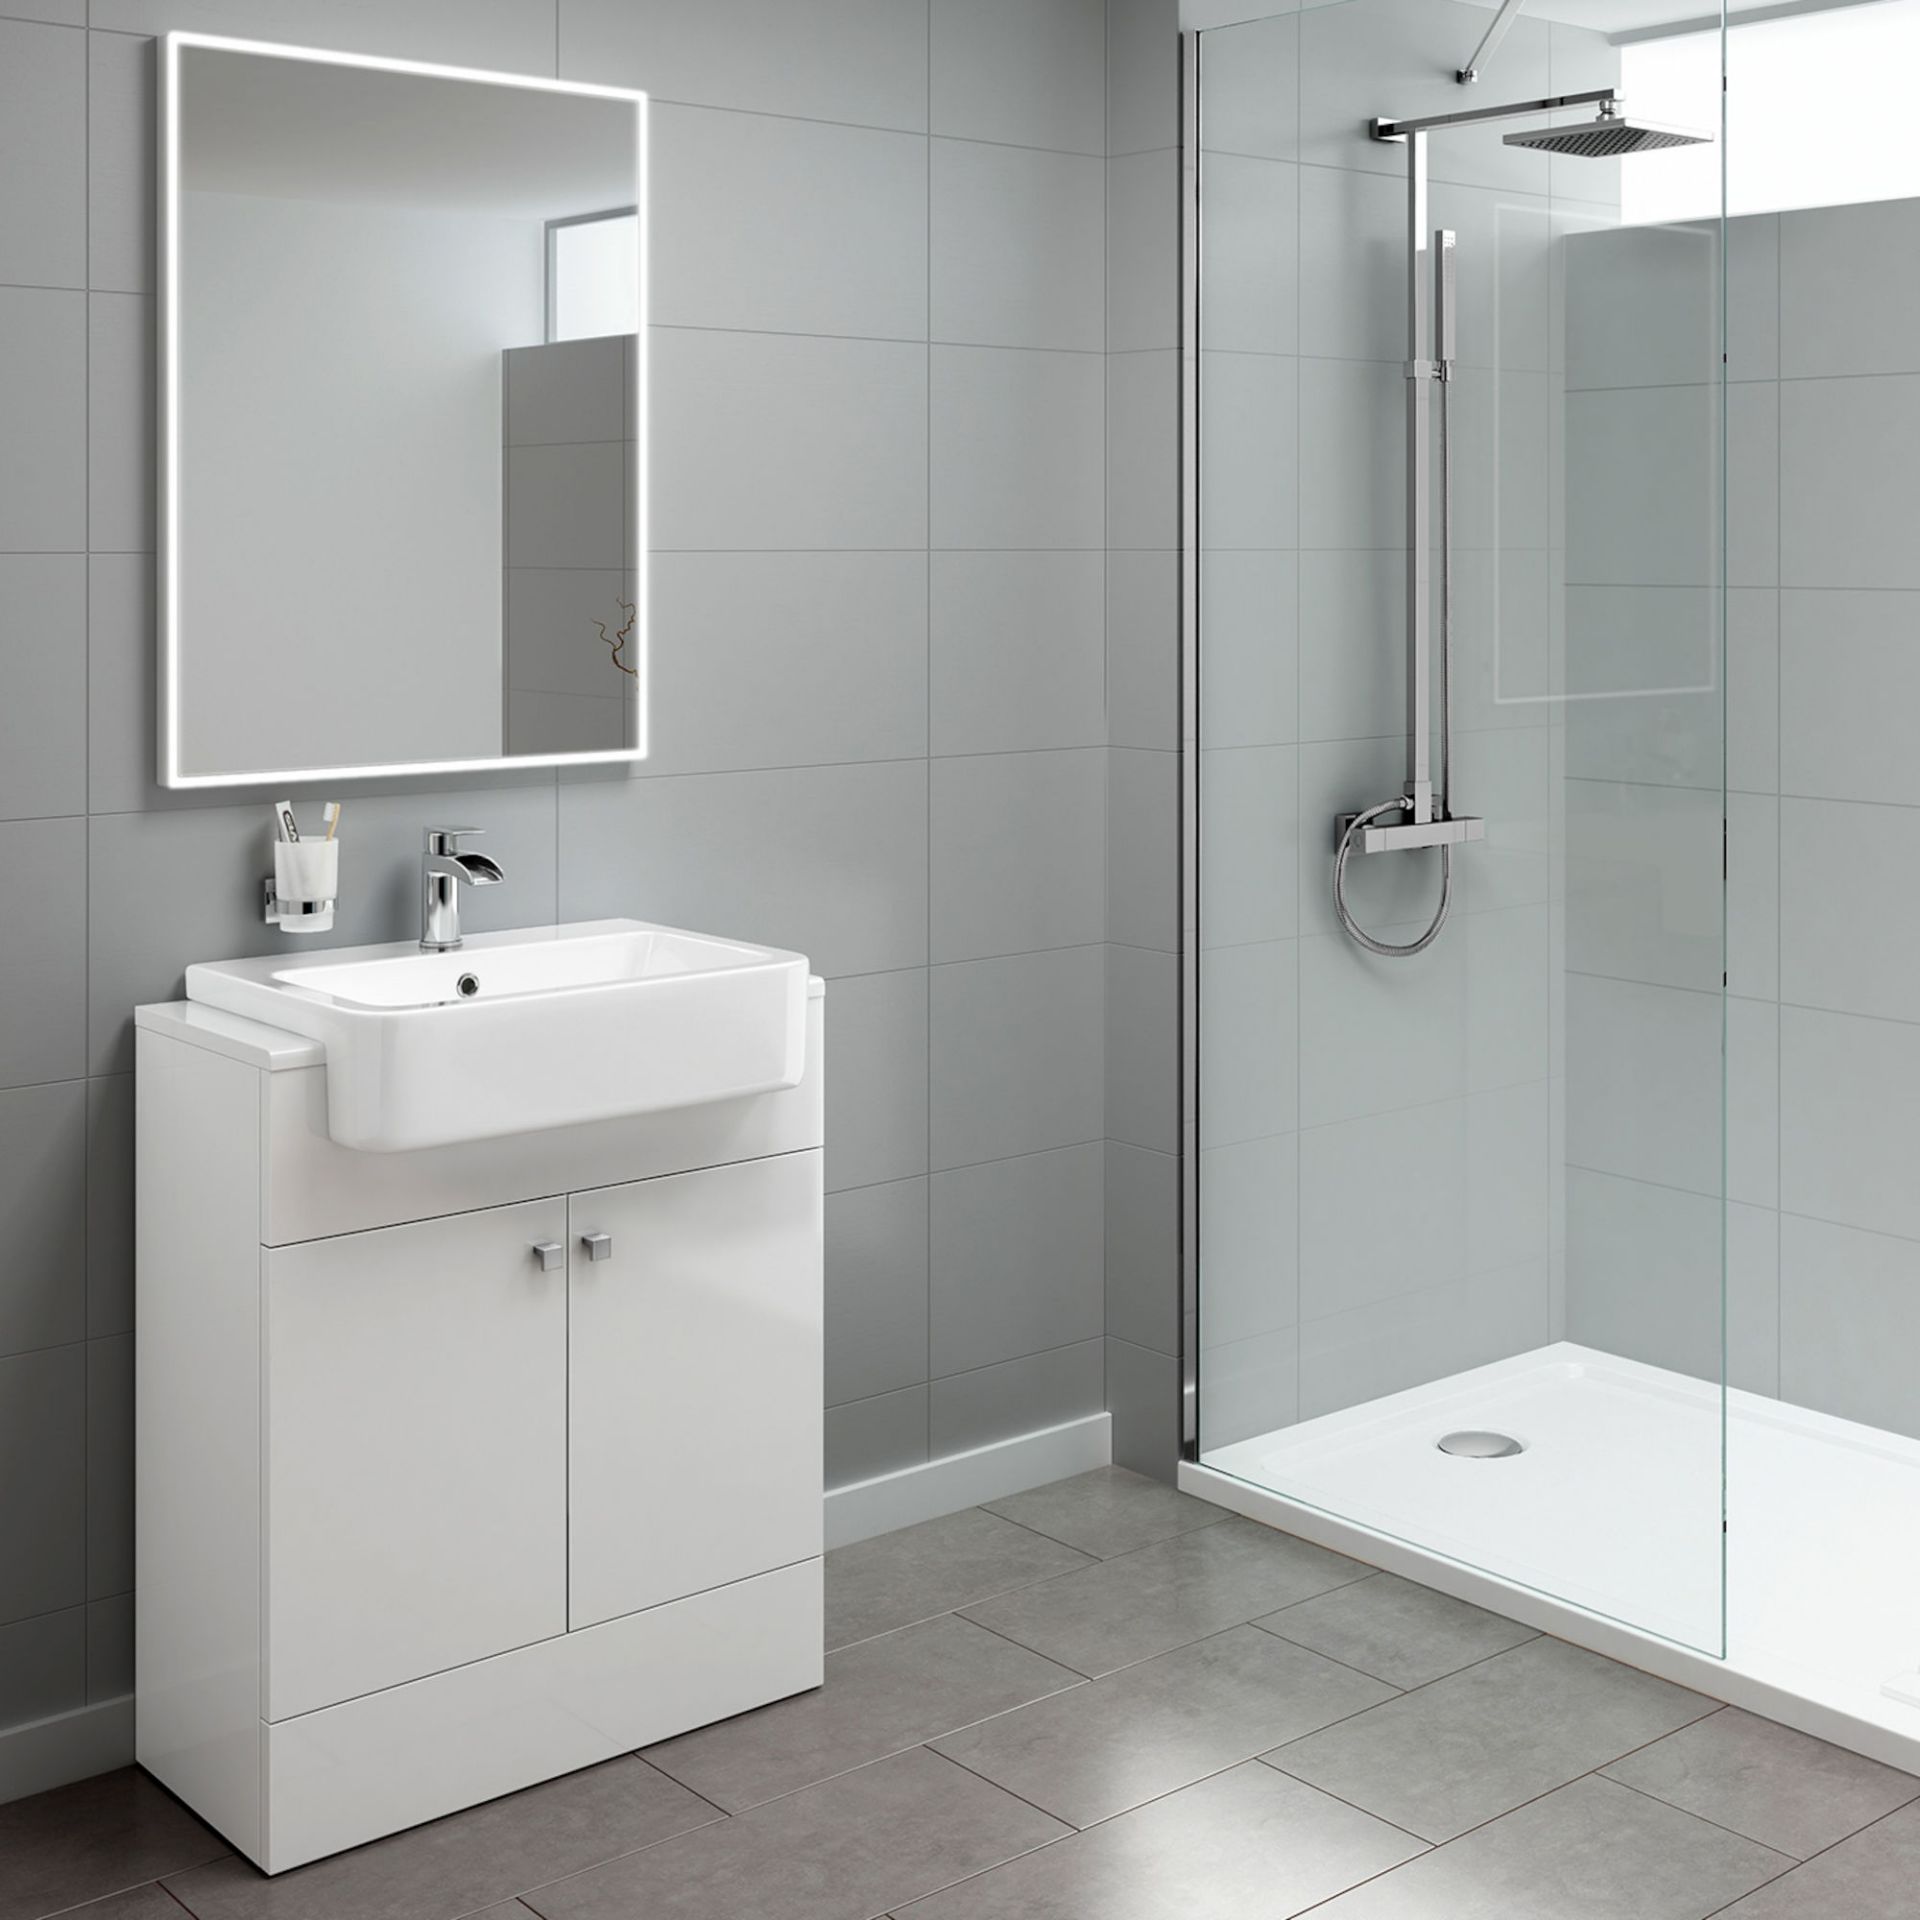 (ZL68) 660mm Harper Gloss White Basin Vanity Unit - Floor Standing. RRP £499.99. Comes complete with - Image 3 of 4